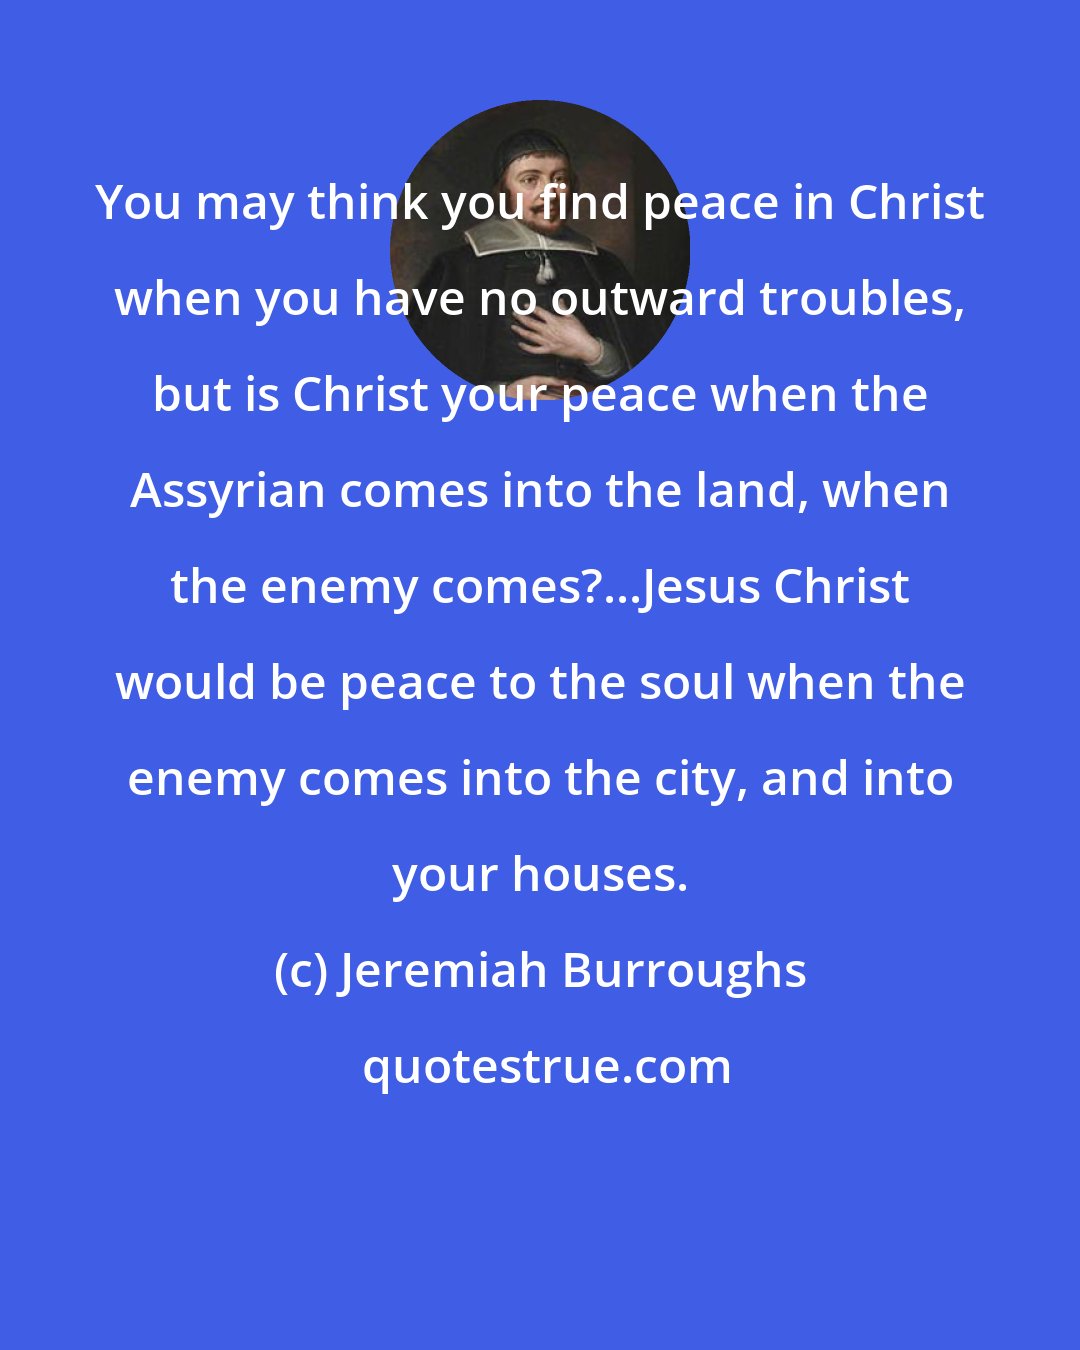 Jeremiah Burroughs: You may think you find peace in Christ when you have no outward troubles, but is Christ your peace when the Assyrian comes into the land, when the enemy comes?...Jesus Christ would be peace to the soul when the enemy comes into the city, and into your houses.